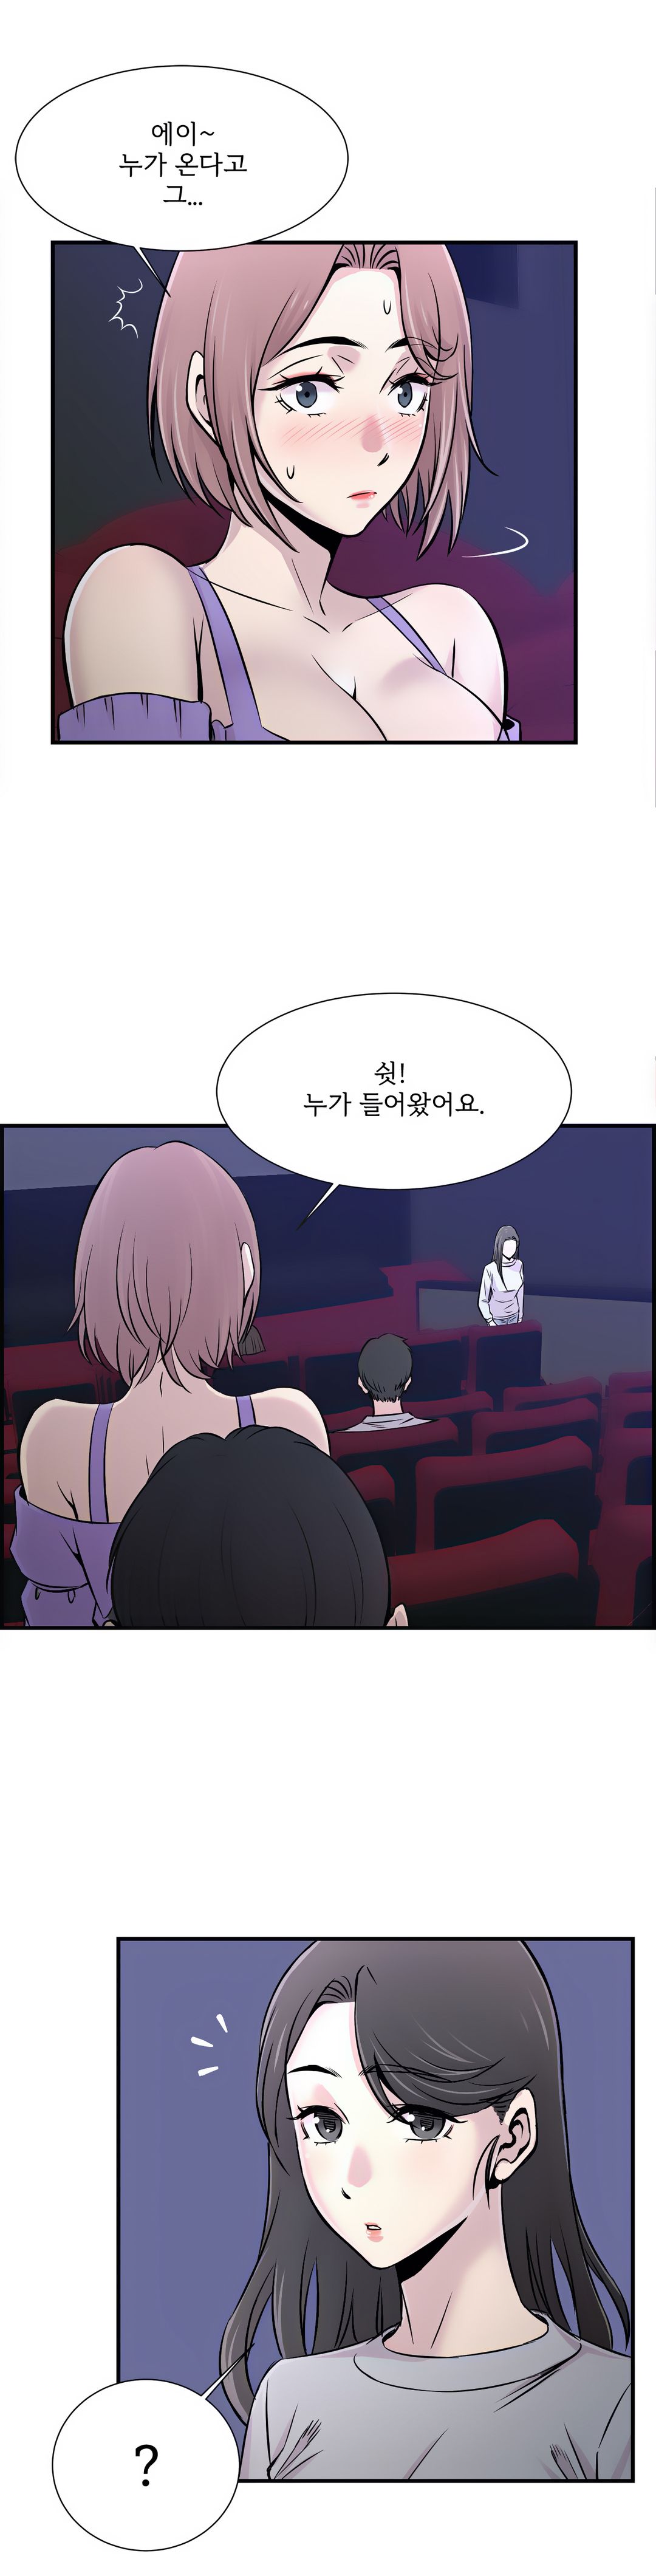 Cram School Scandal Raw - Chapter 16 Page 6